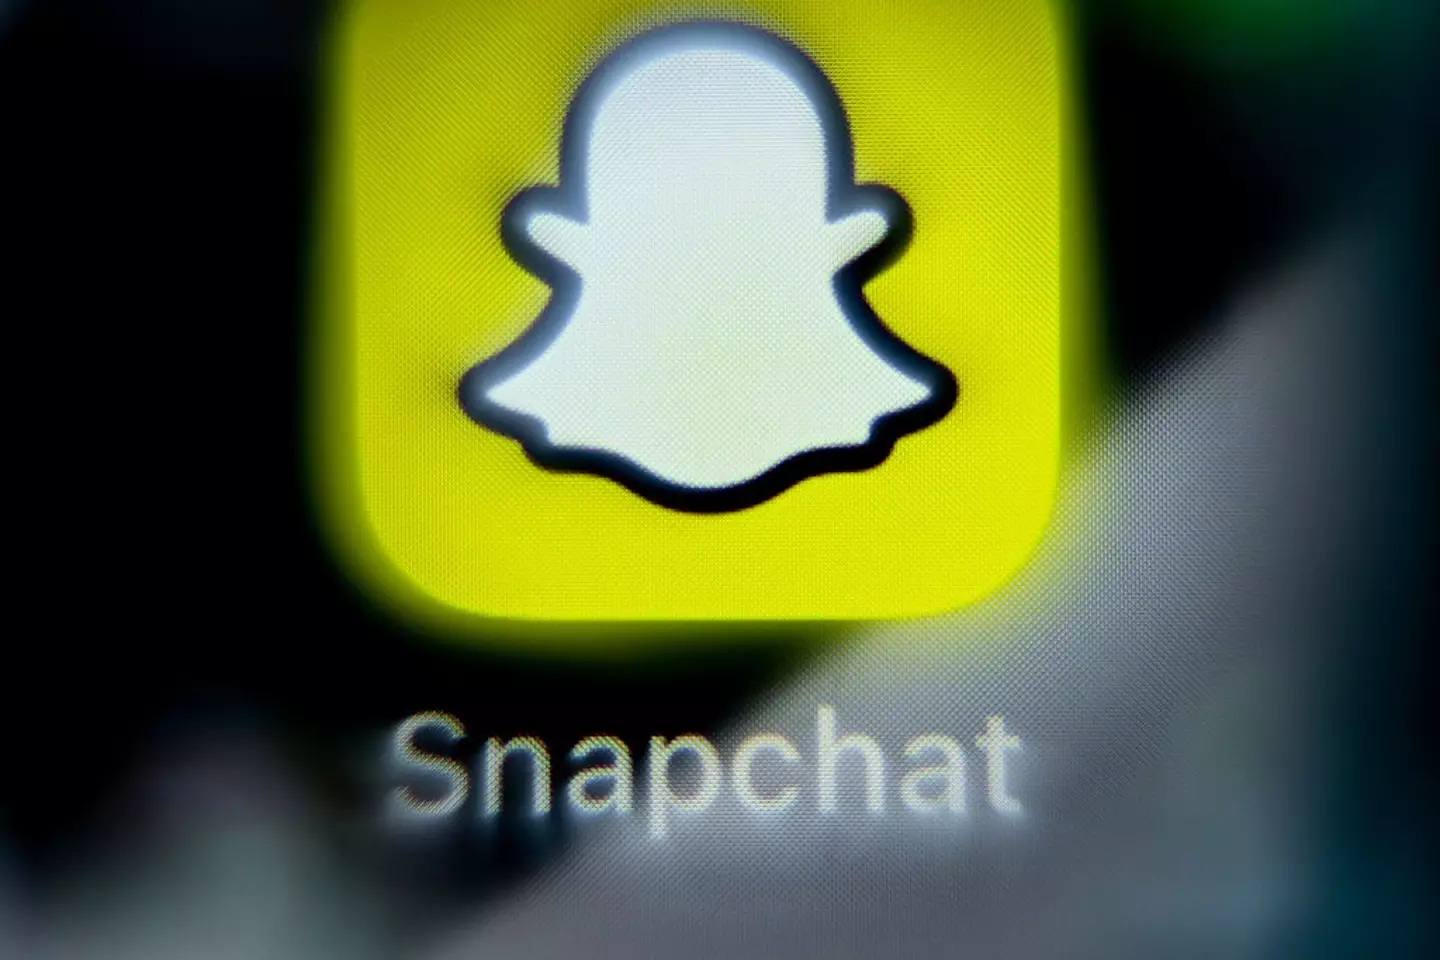 Snap Maps also users to view each other's location. (KIRILL KUDRYAVTSEV / Contributor / Getty Images)